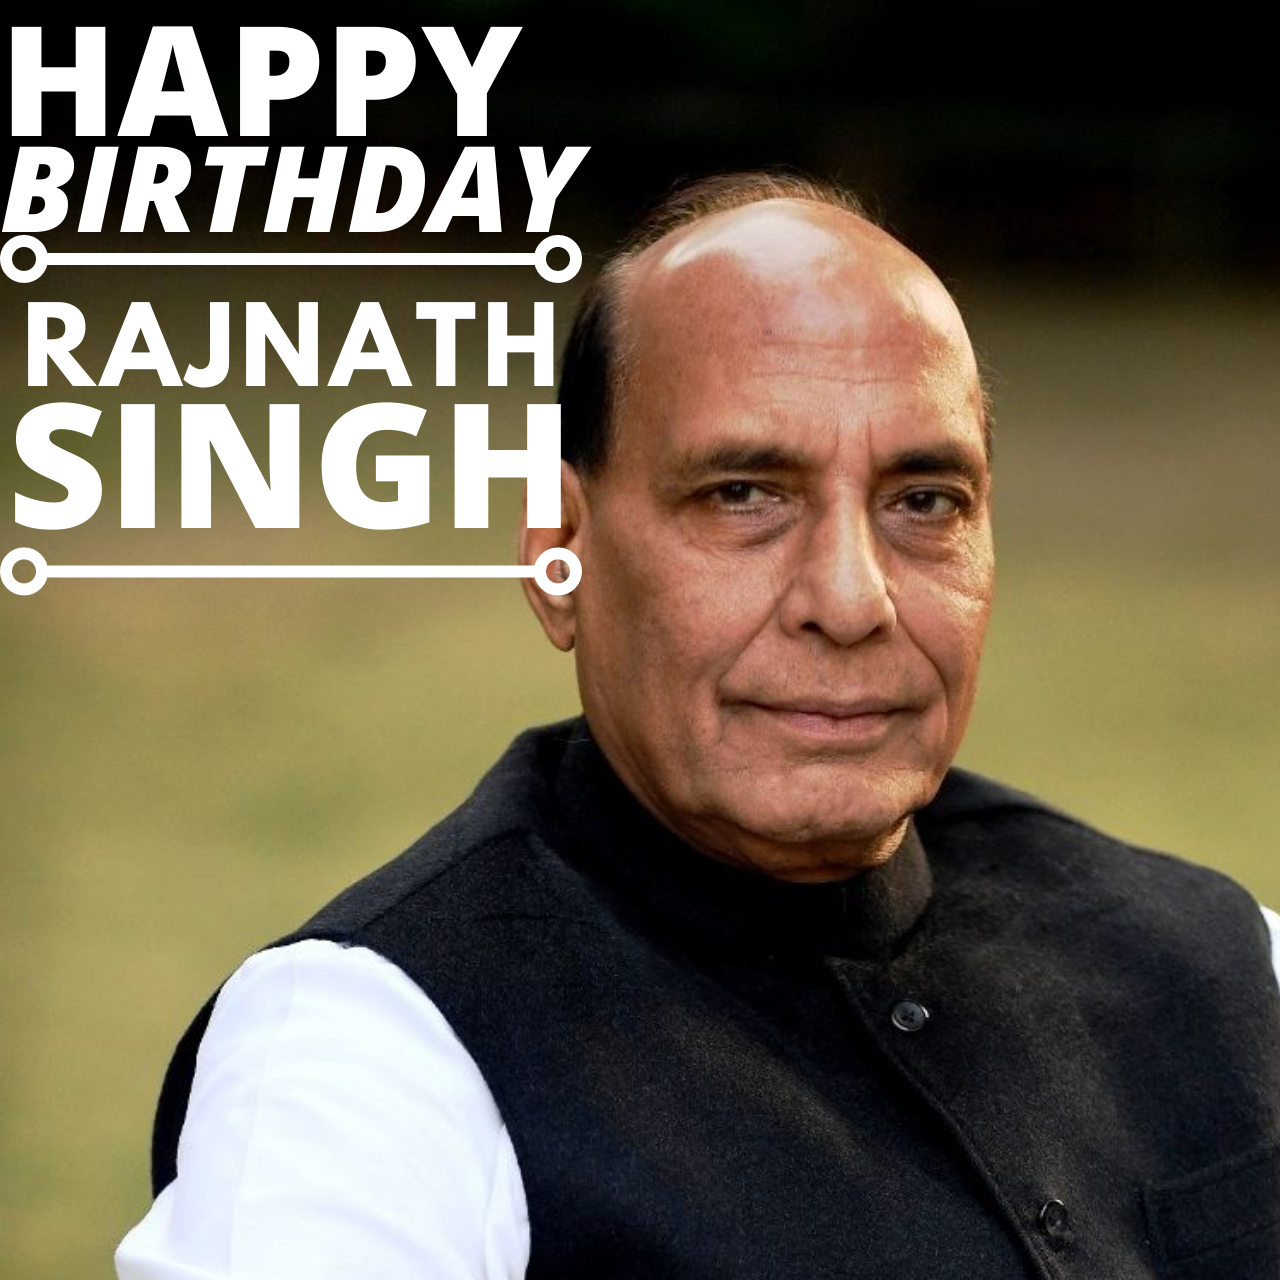 Happy Birthday Rajnath Singh: Wishes, Photos (Images), Poster, and WhatsApp Status Video Download to greet India's 'Defence Minister'